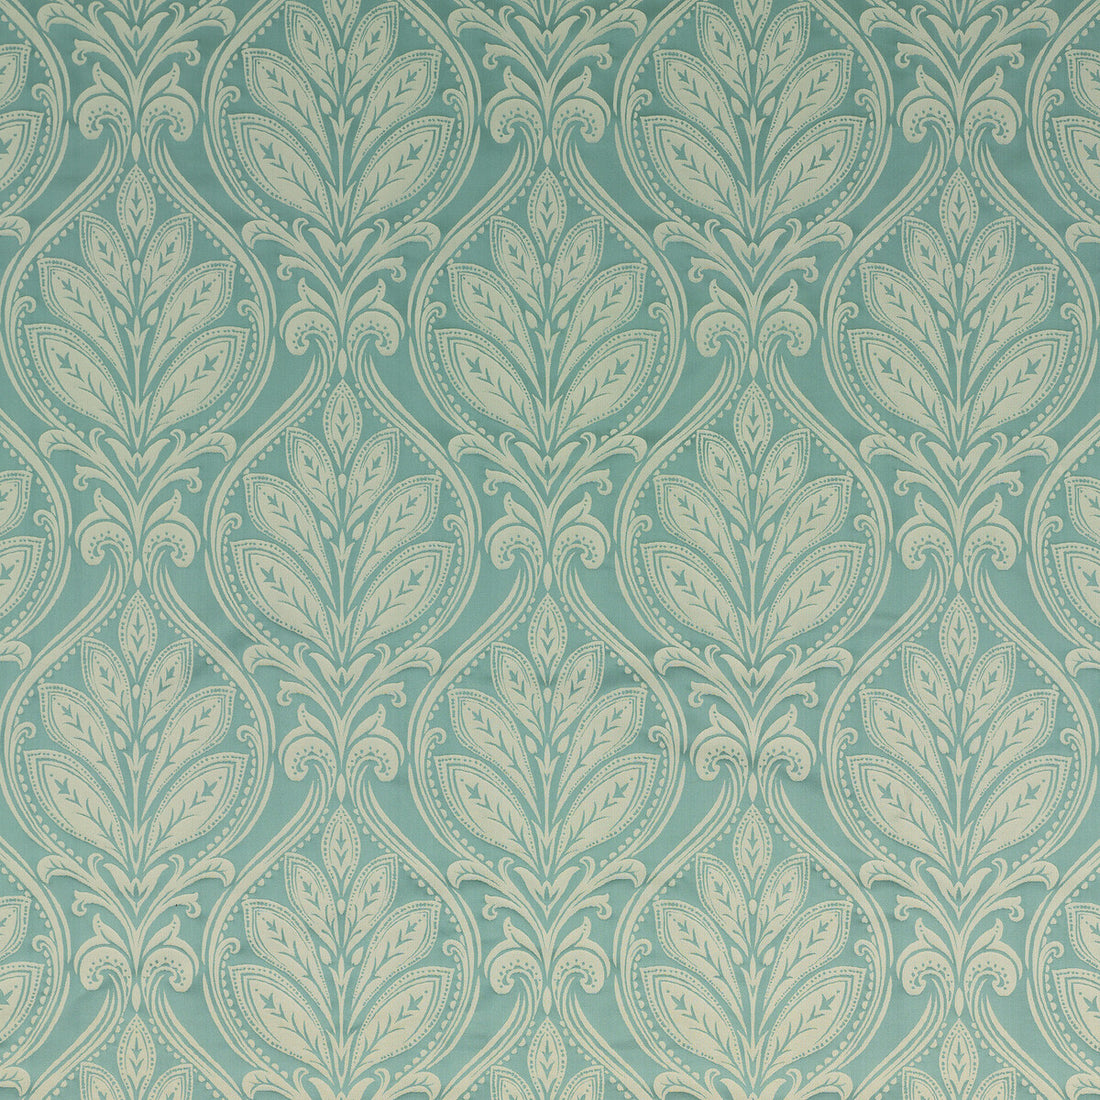 Ryecote Damask fabric in aqua color - pattern BF10492.725.0 - by G P &amp; J Baker in the Simply Damask collection